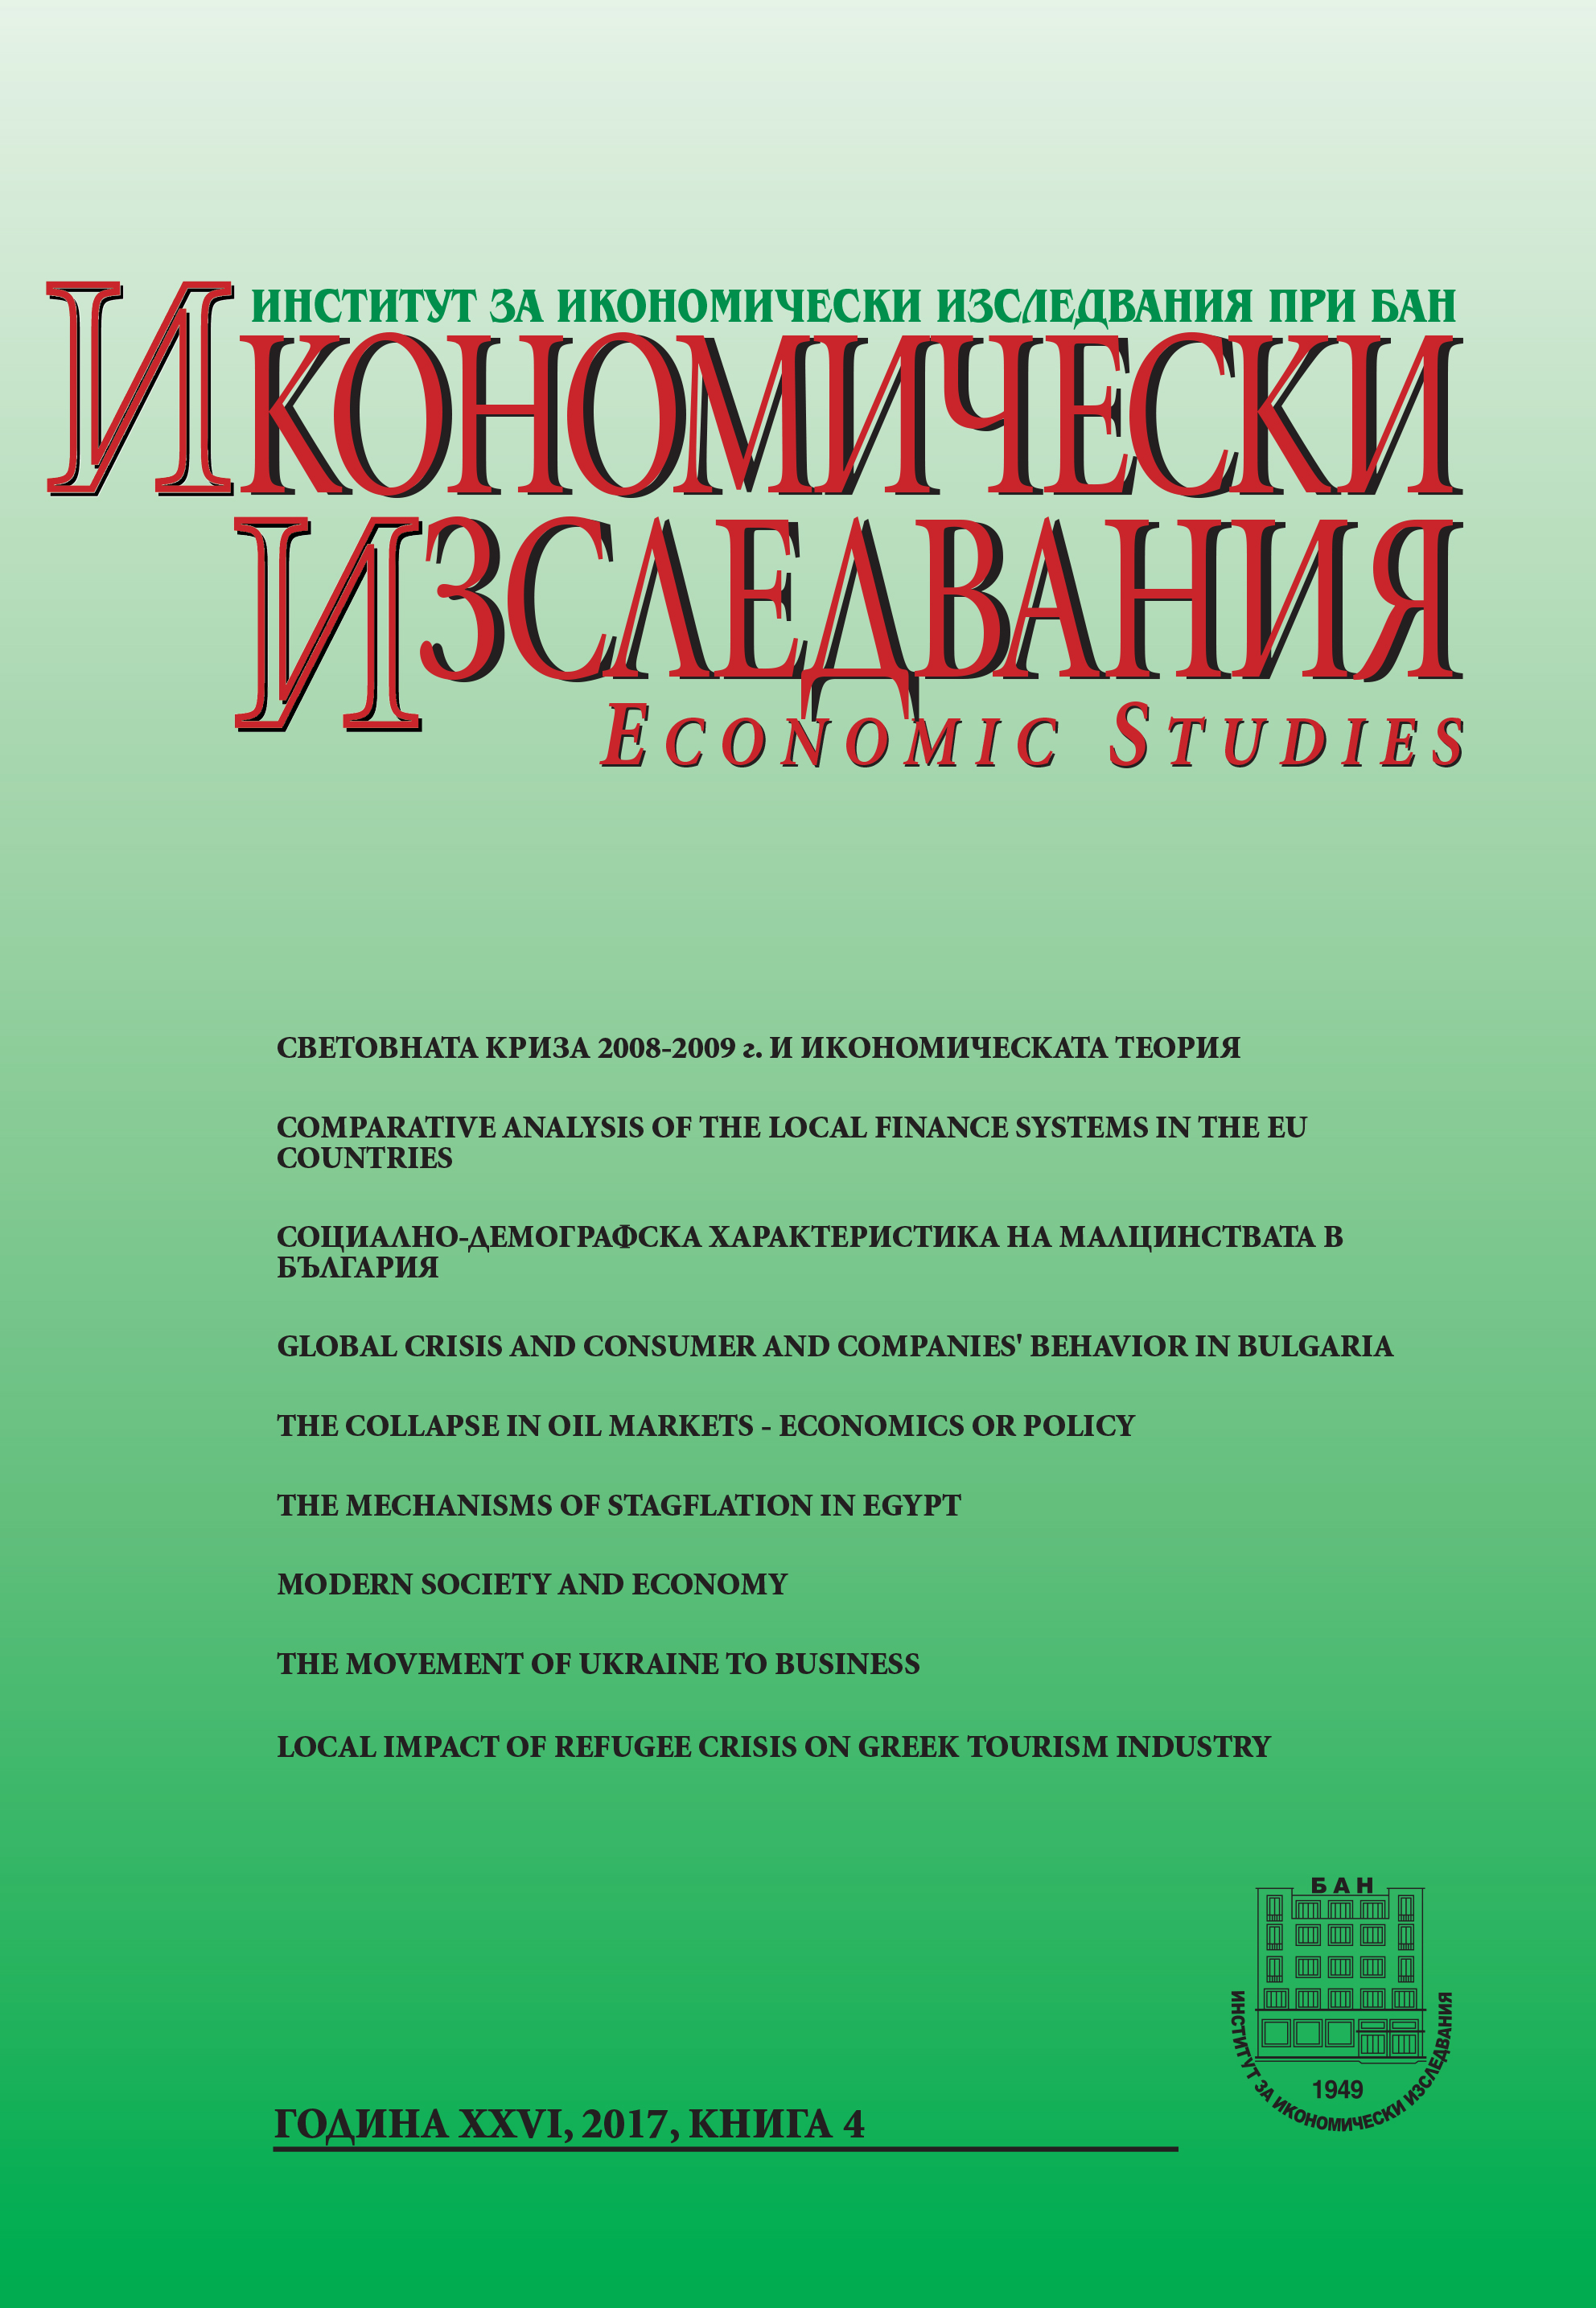 The perception movement economy of Ukraine to business Cover Image